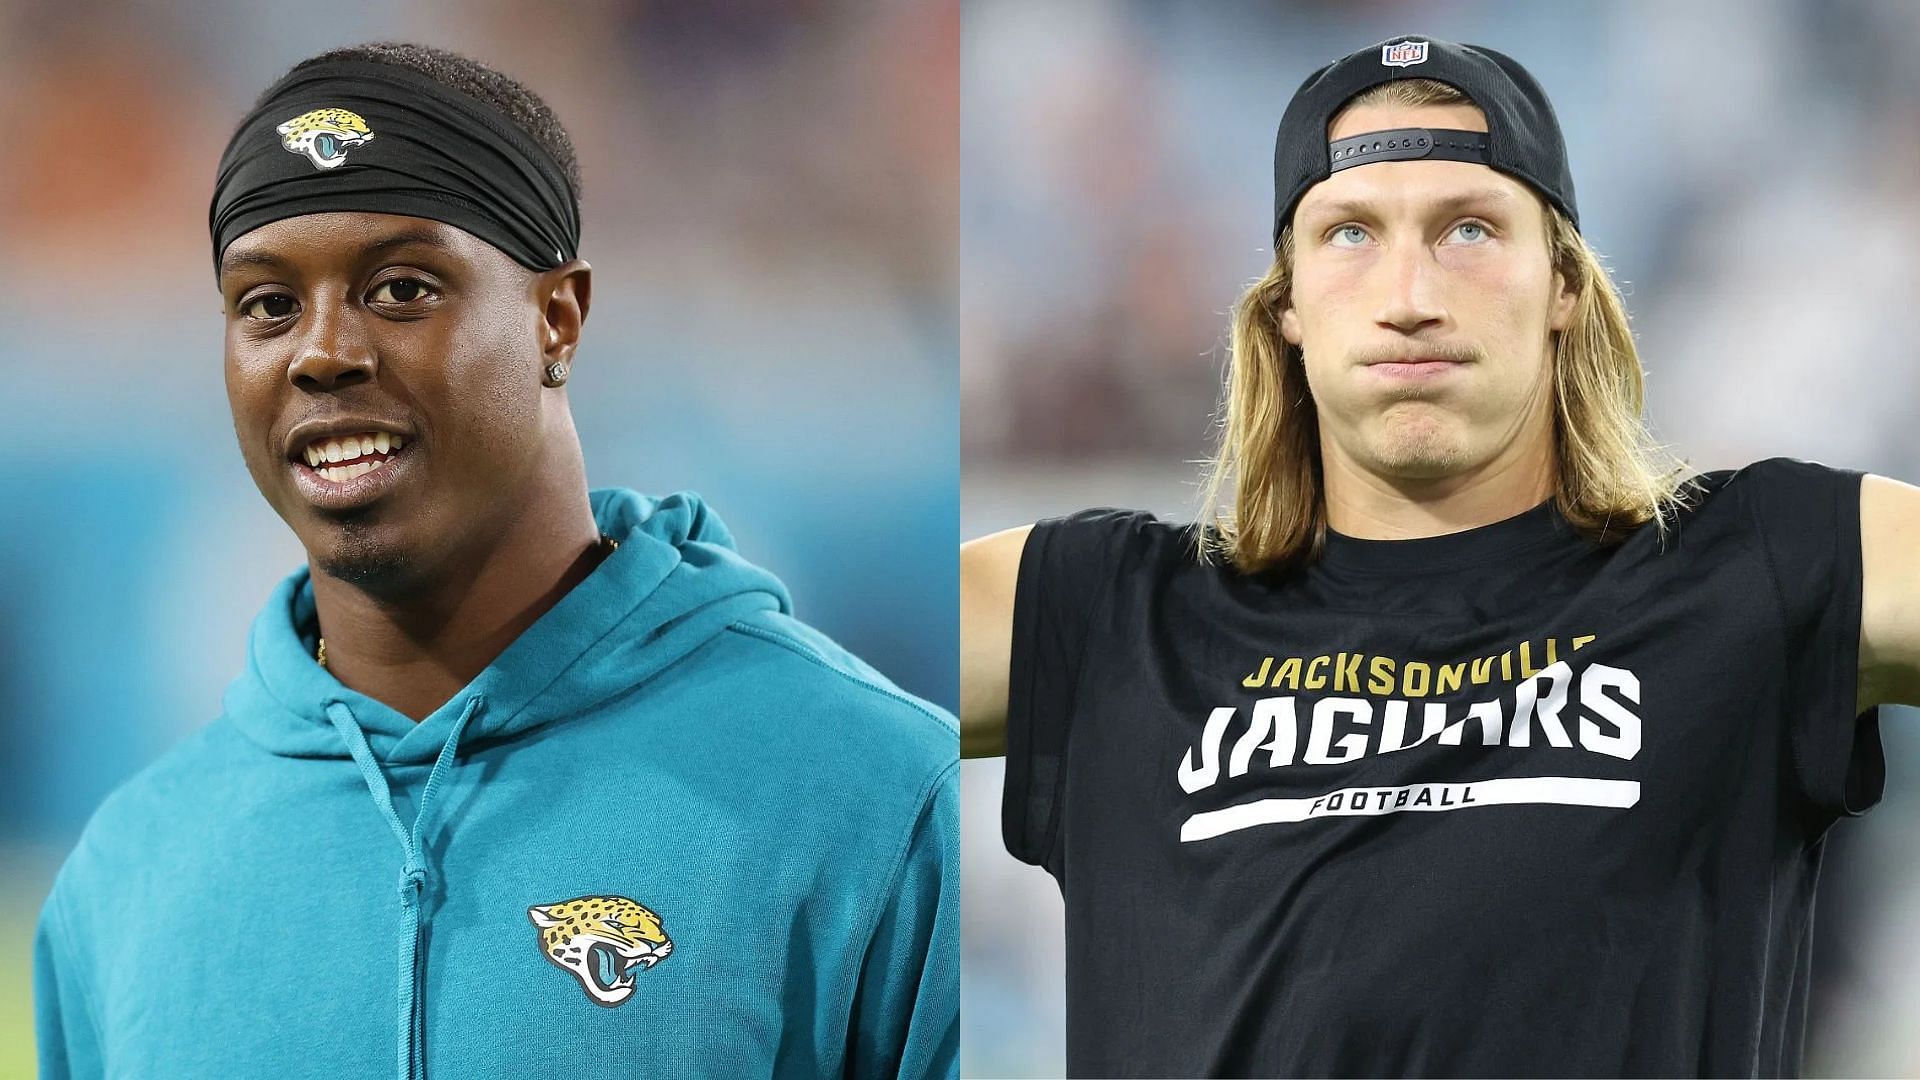 The Jacksonville Jaguars are staking their offensice line to maximize Trevor Lawrence